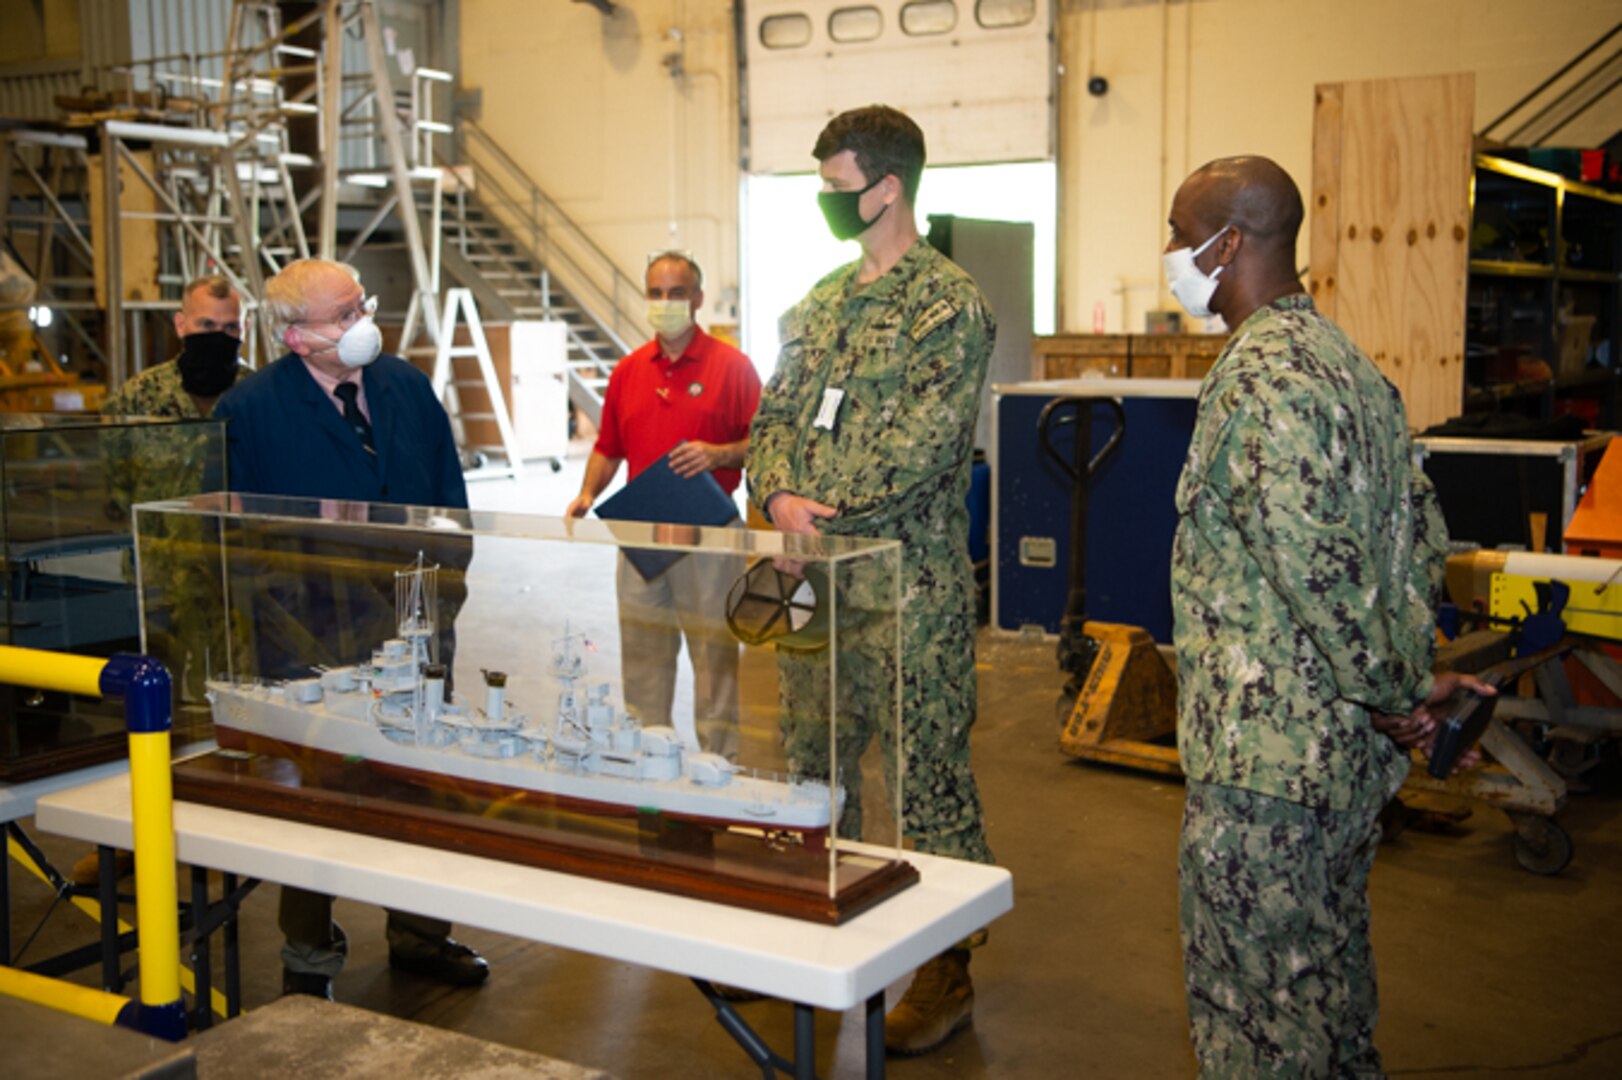 Dana Wegner, Curator of Navy Ship Models shows Rear Adm. Kevin Byrne one of the many models in the Navy’s collection of 3,500 model ships on June 4, 2020.